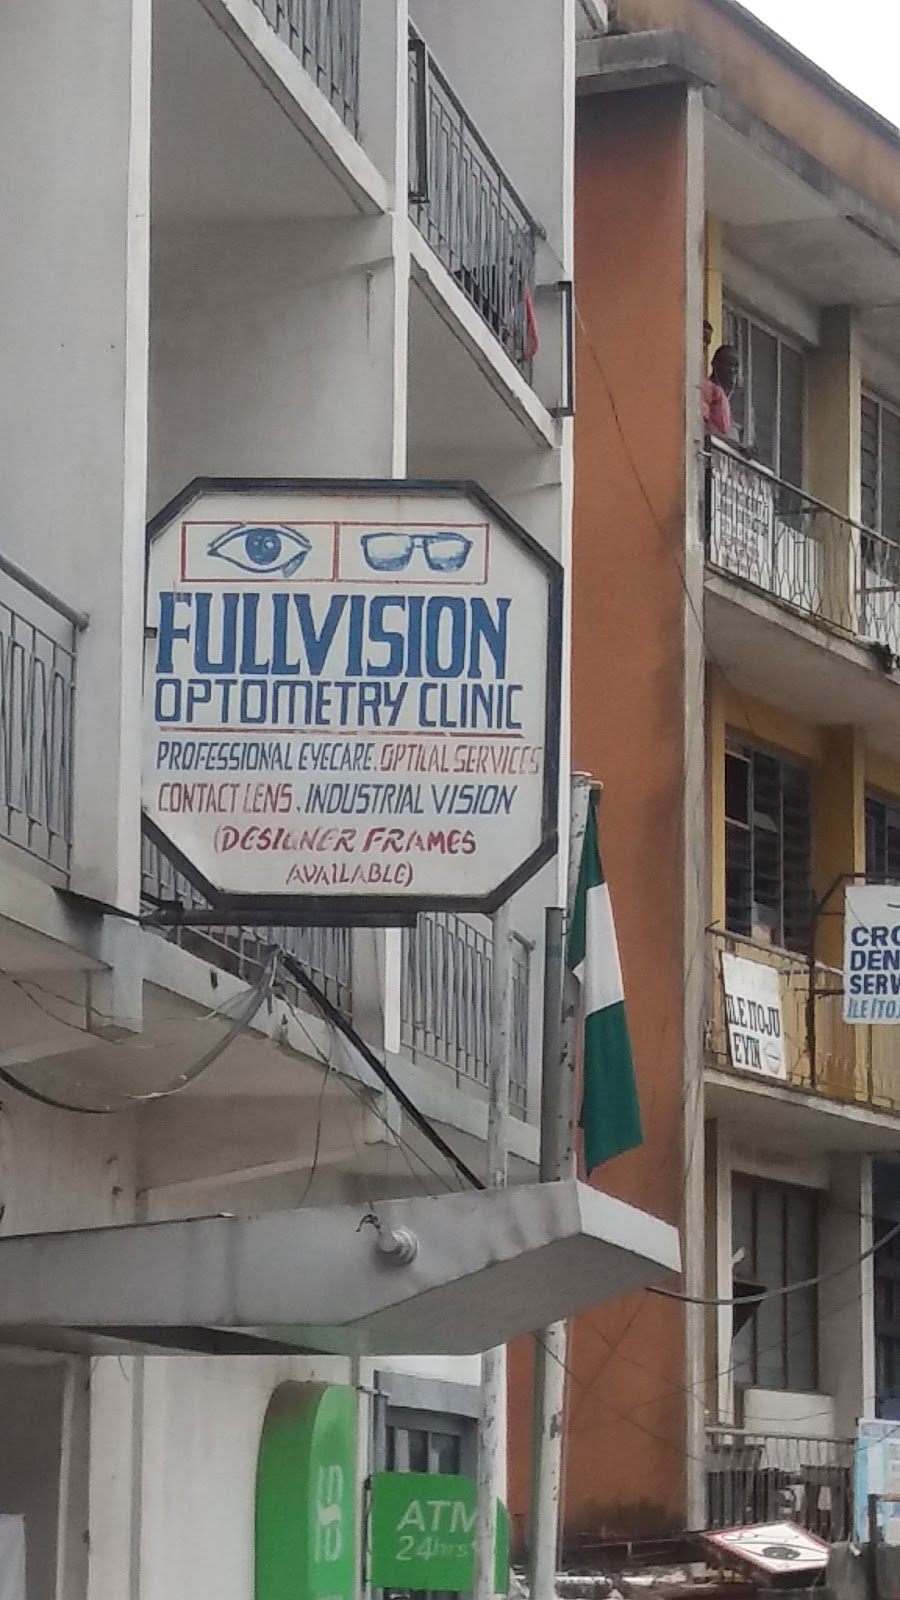 Fullvision Optometry Clinic